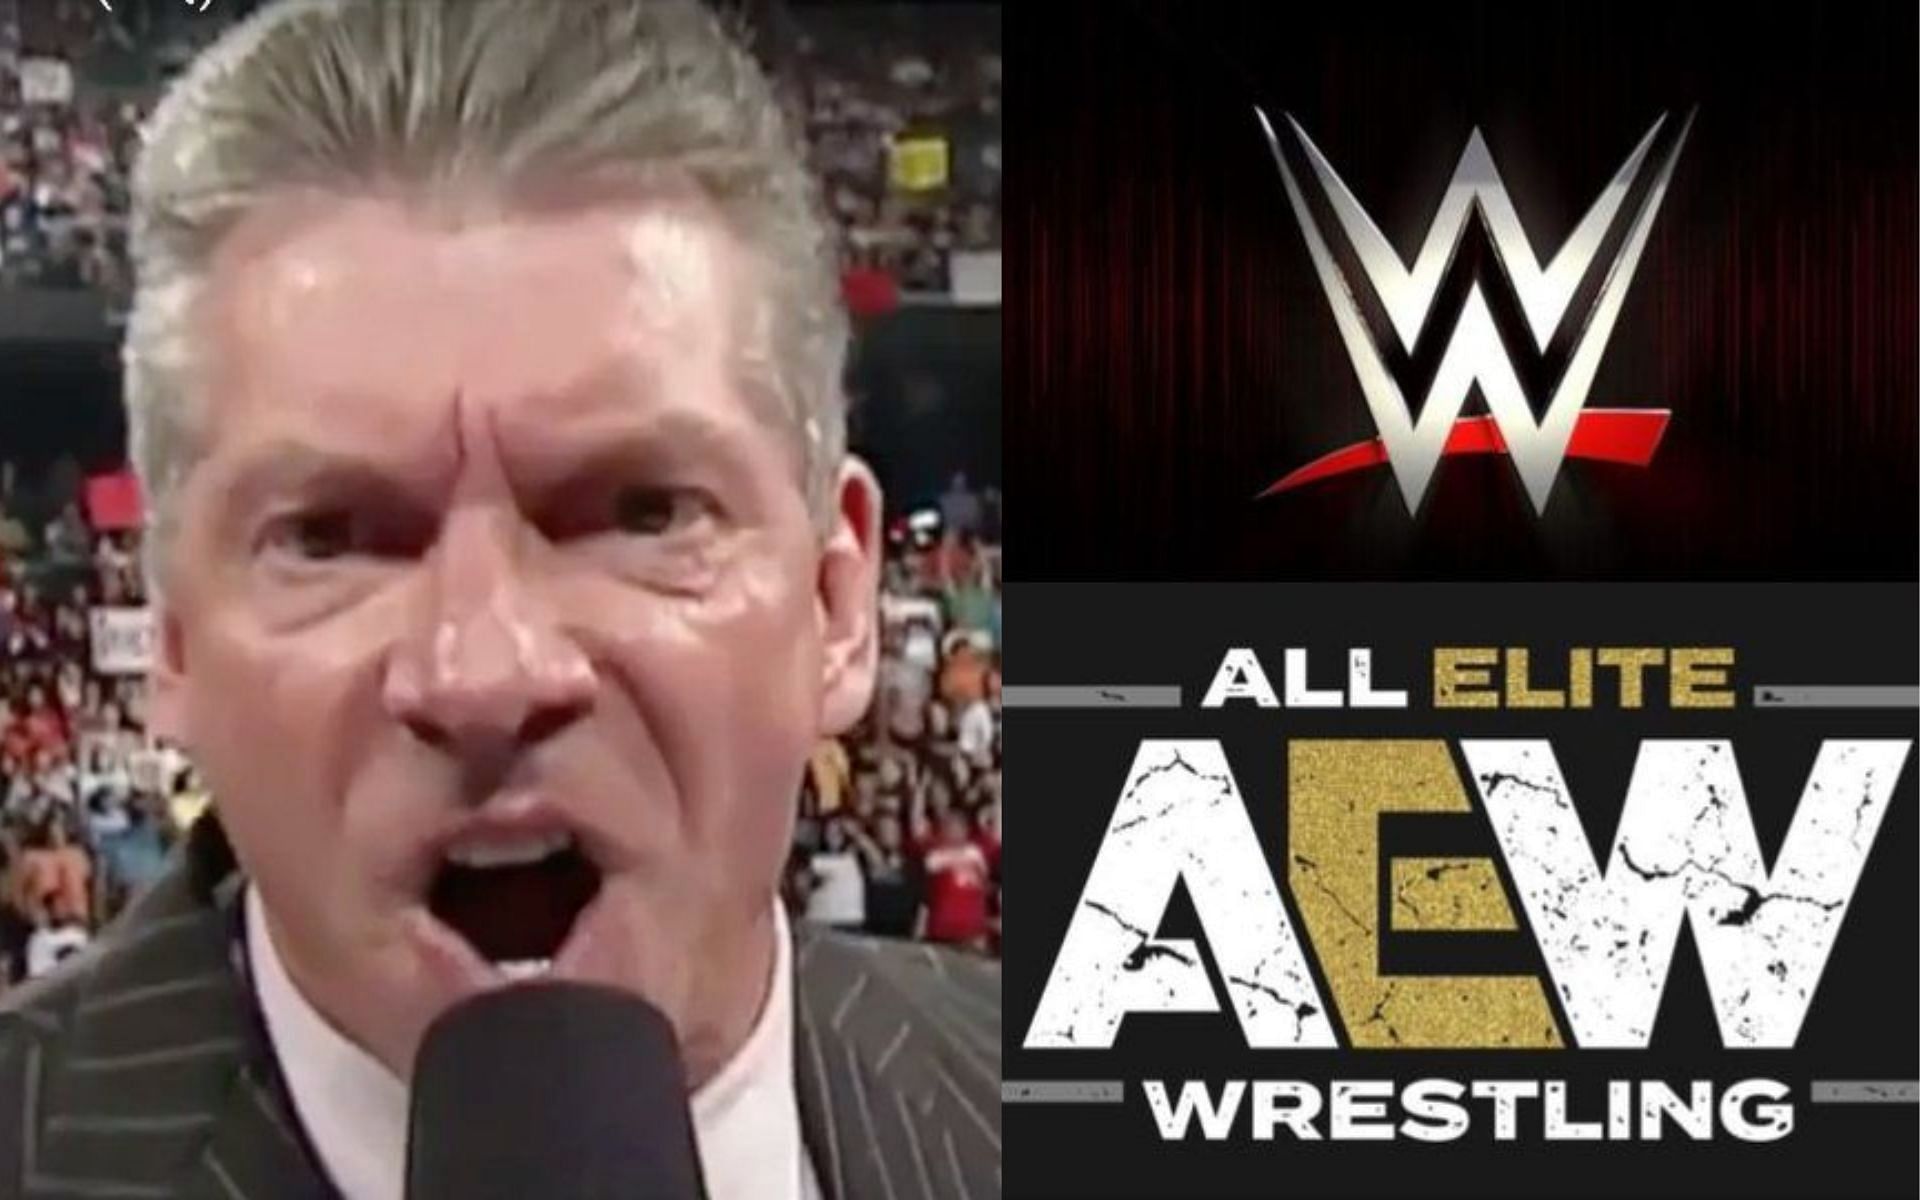 Vince McMahon (left) and AEW and WWE logos (right).